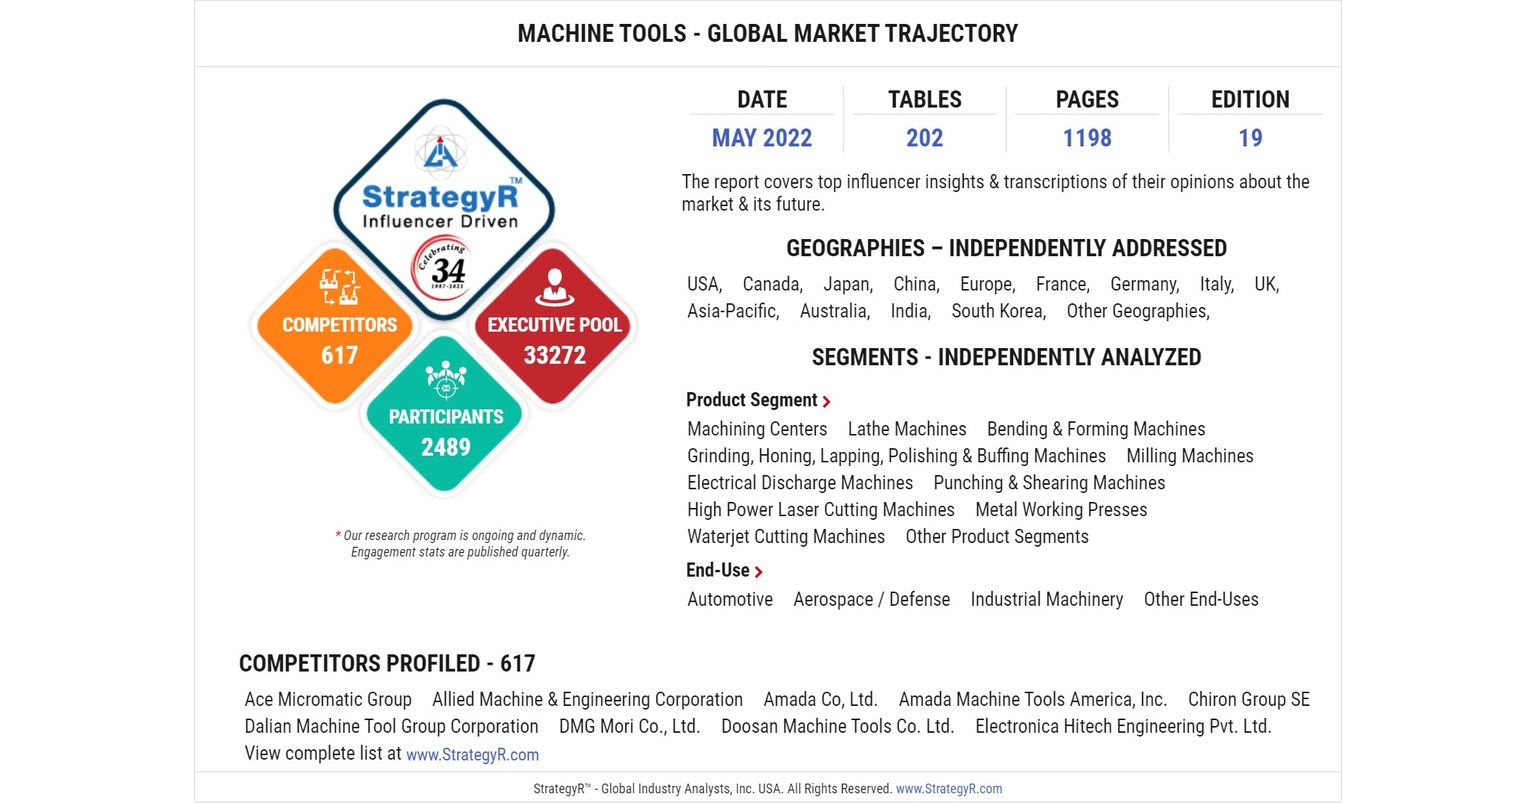 New Analysis from Global Industry Analysts Reveals Steady Growth for Machine Tools, with the Market to Reach $98.3 Billion Worldwide by 2026